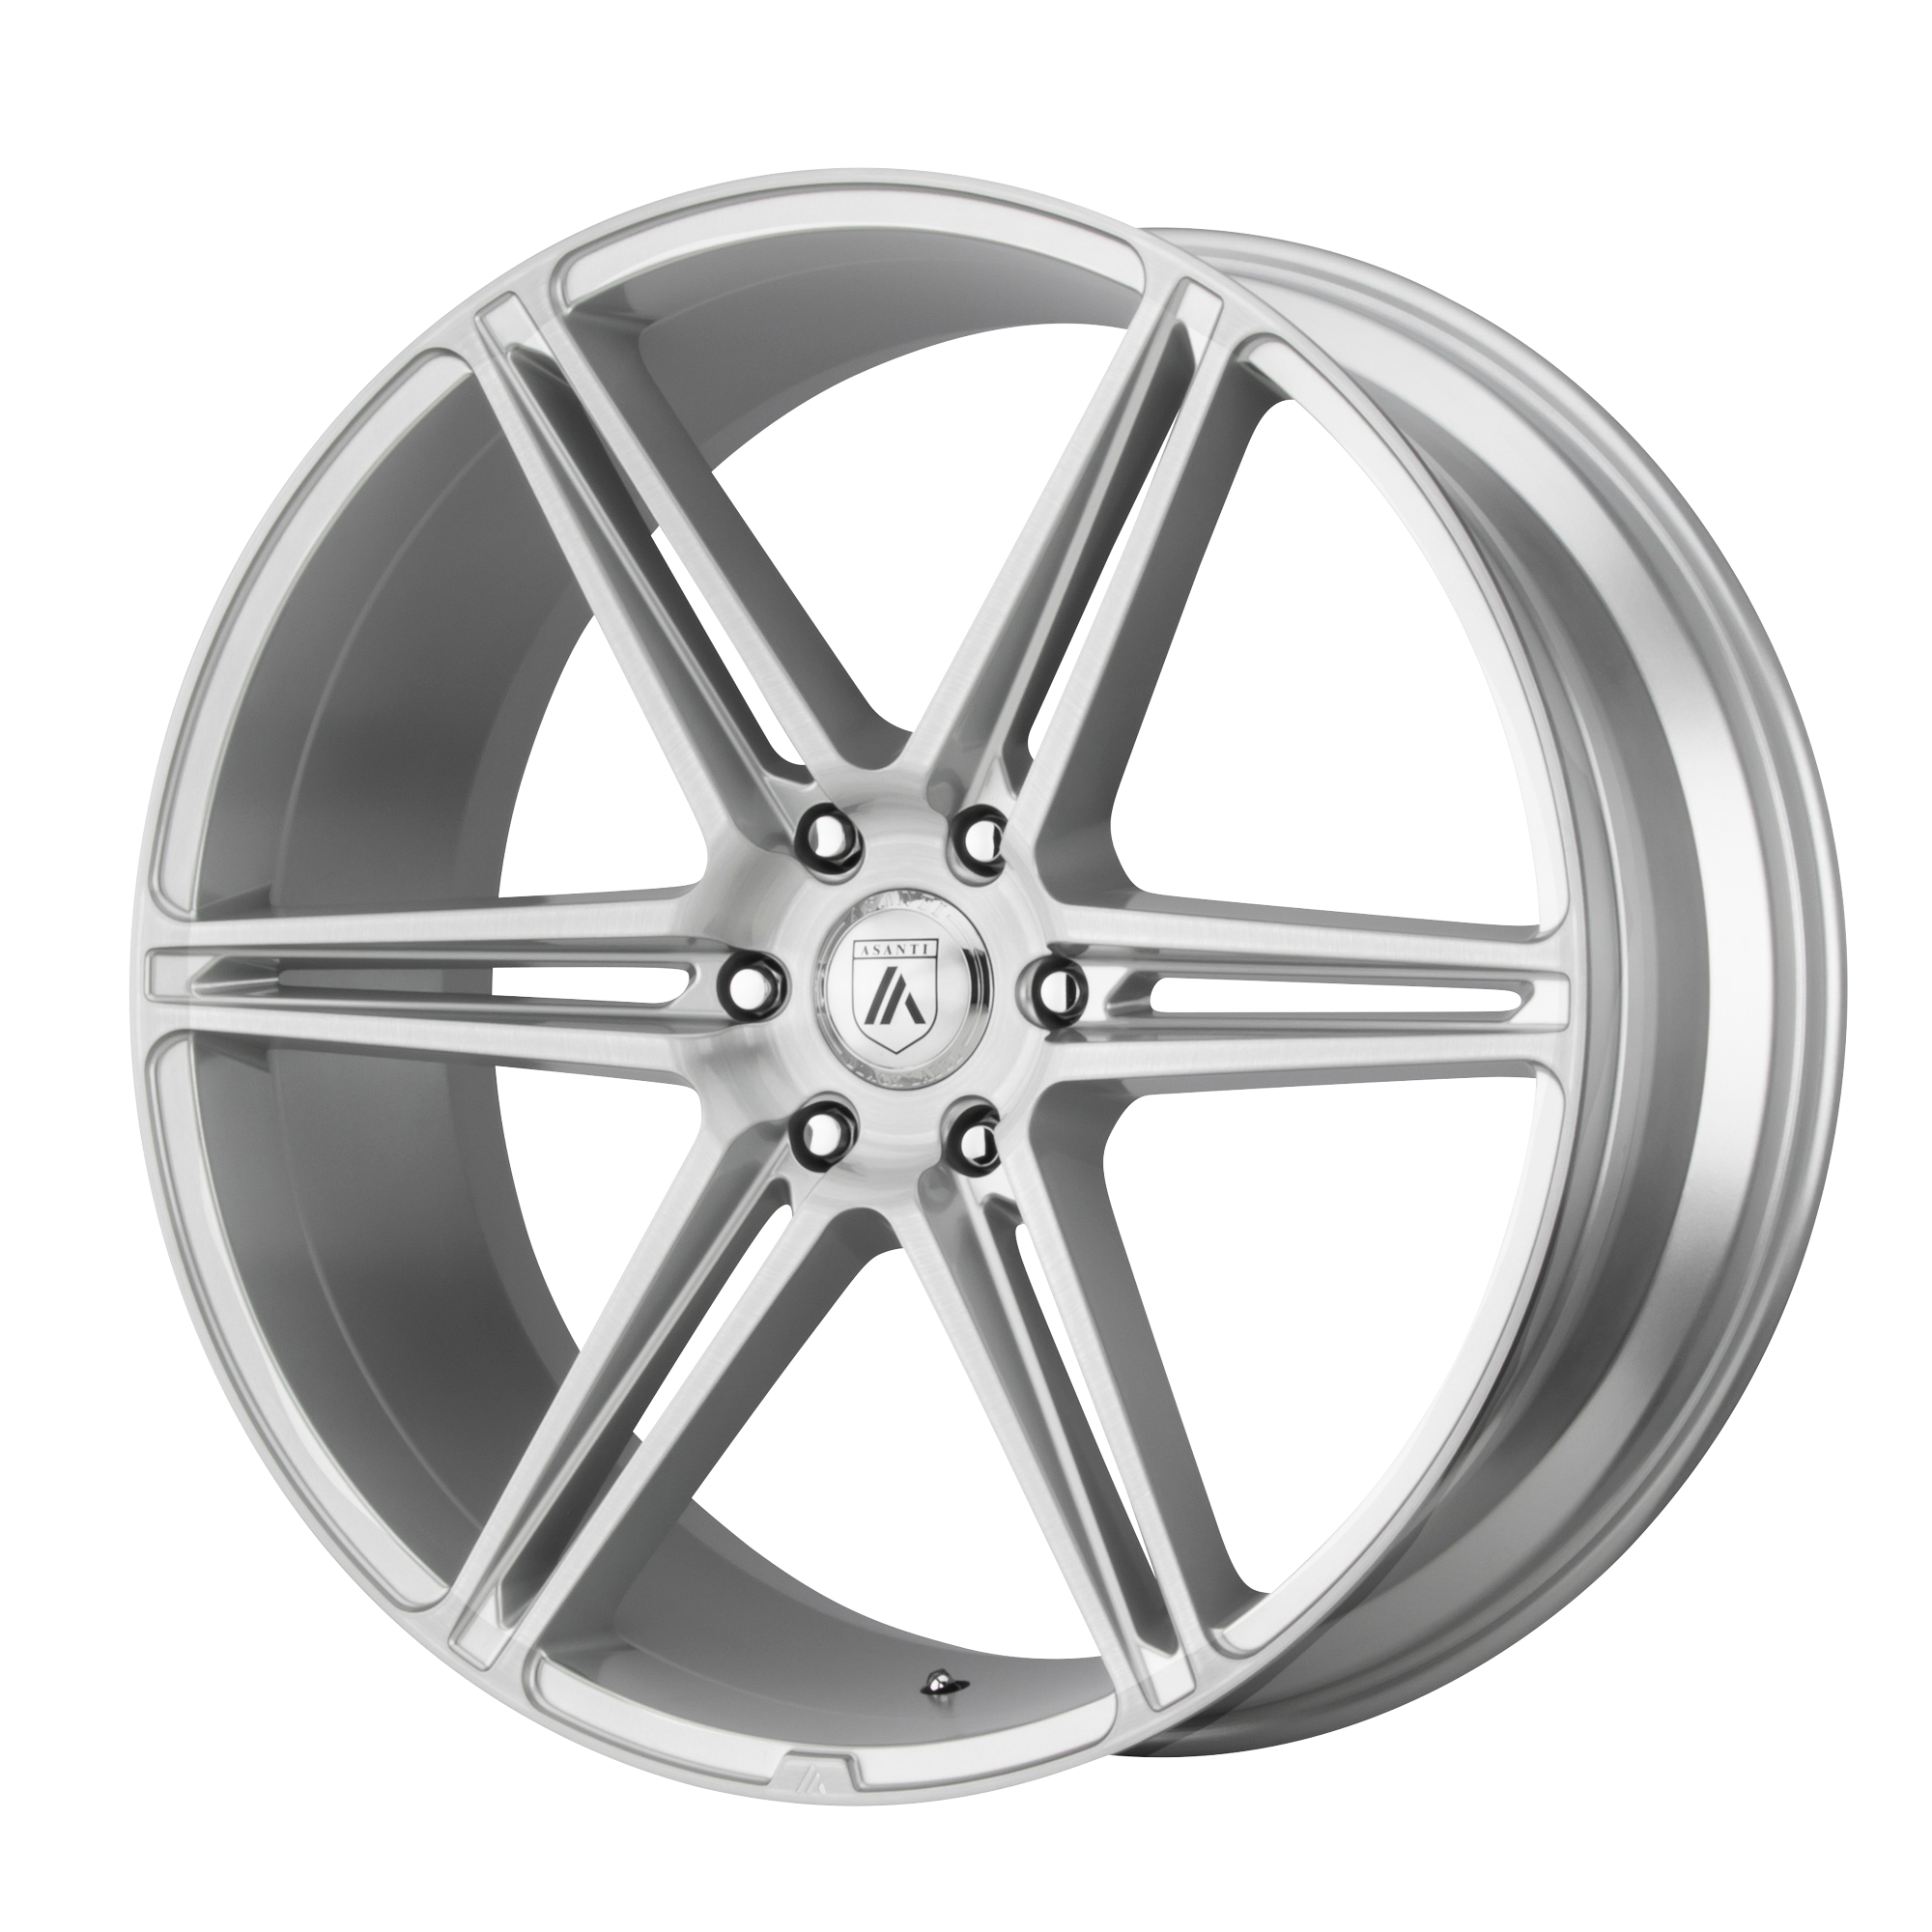 ALPHA 6 20x9 6x135.00 BRUSHED SILVER (30 mm) - Tires and Engine Performance